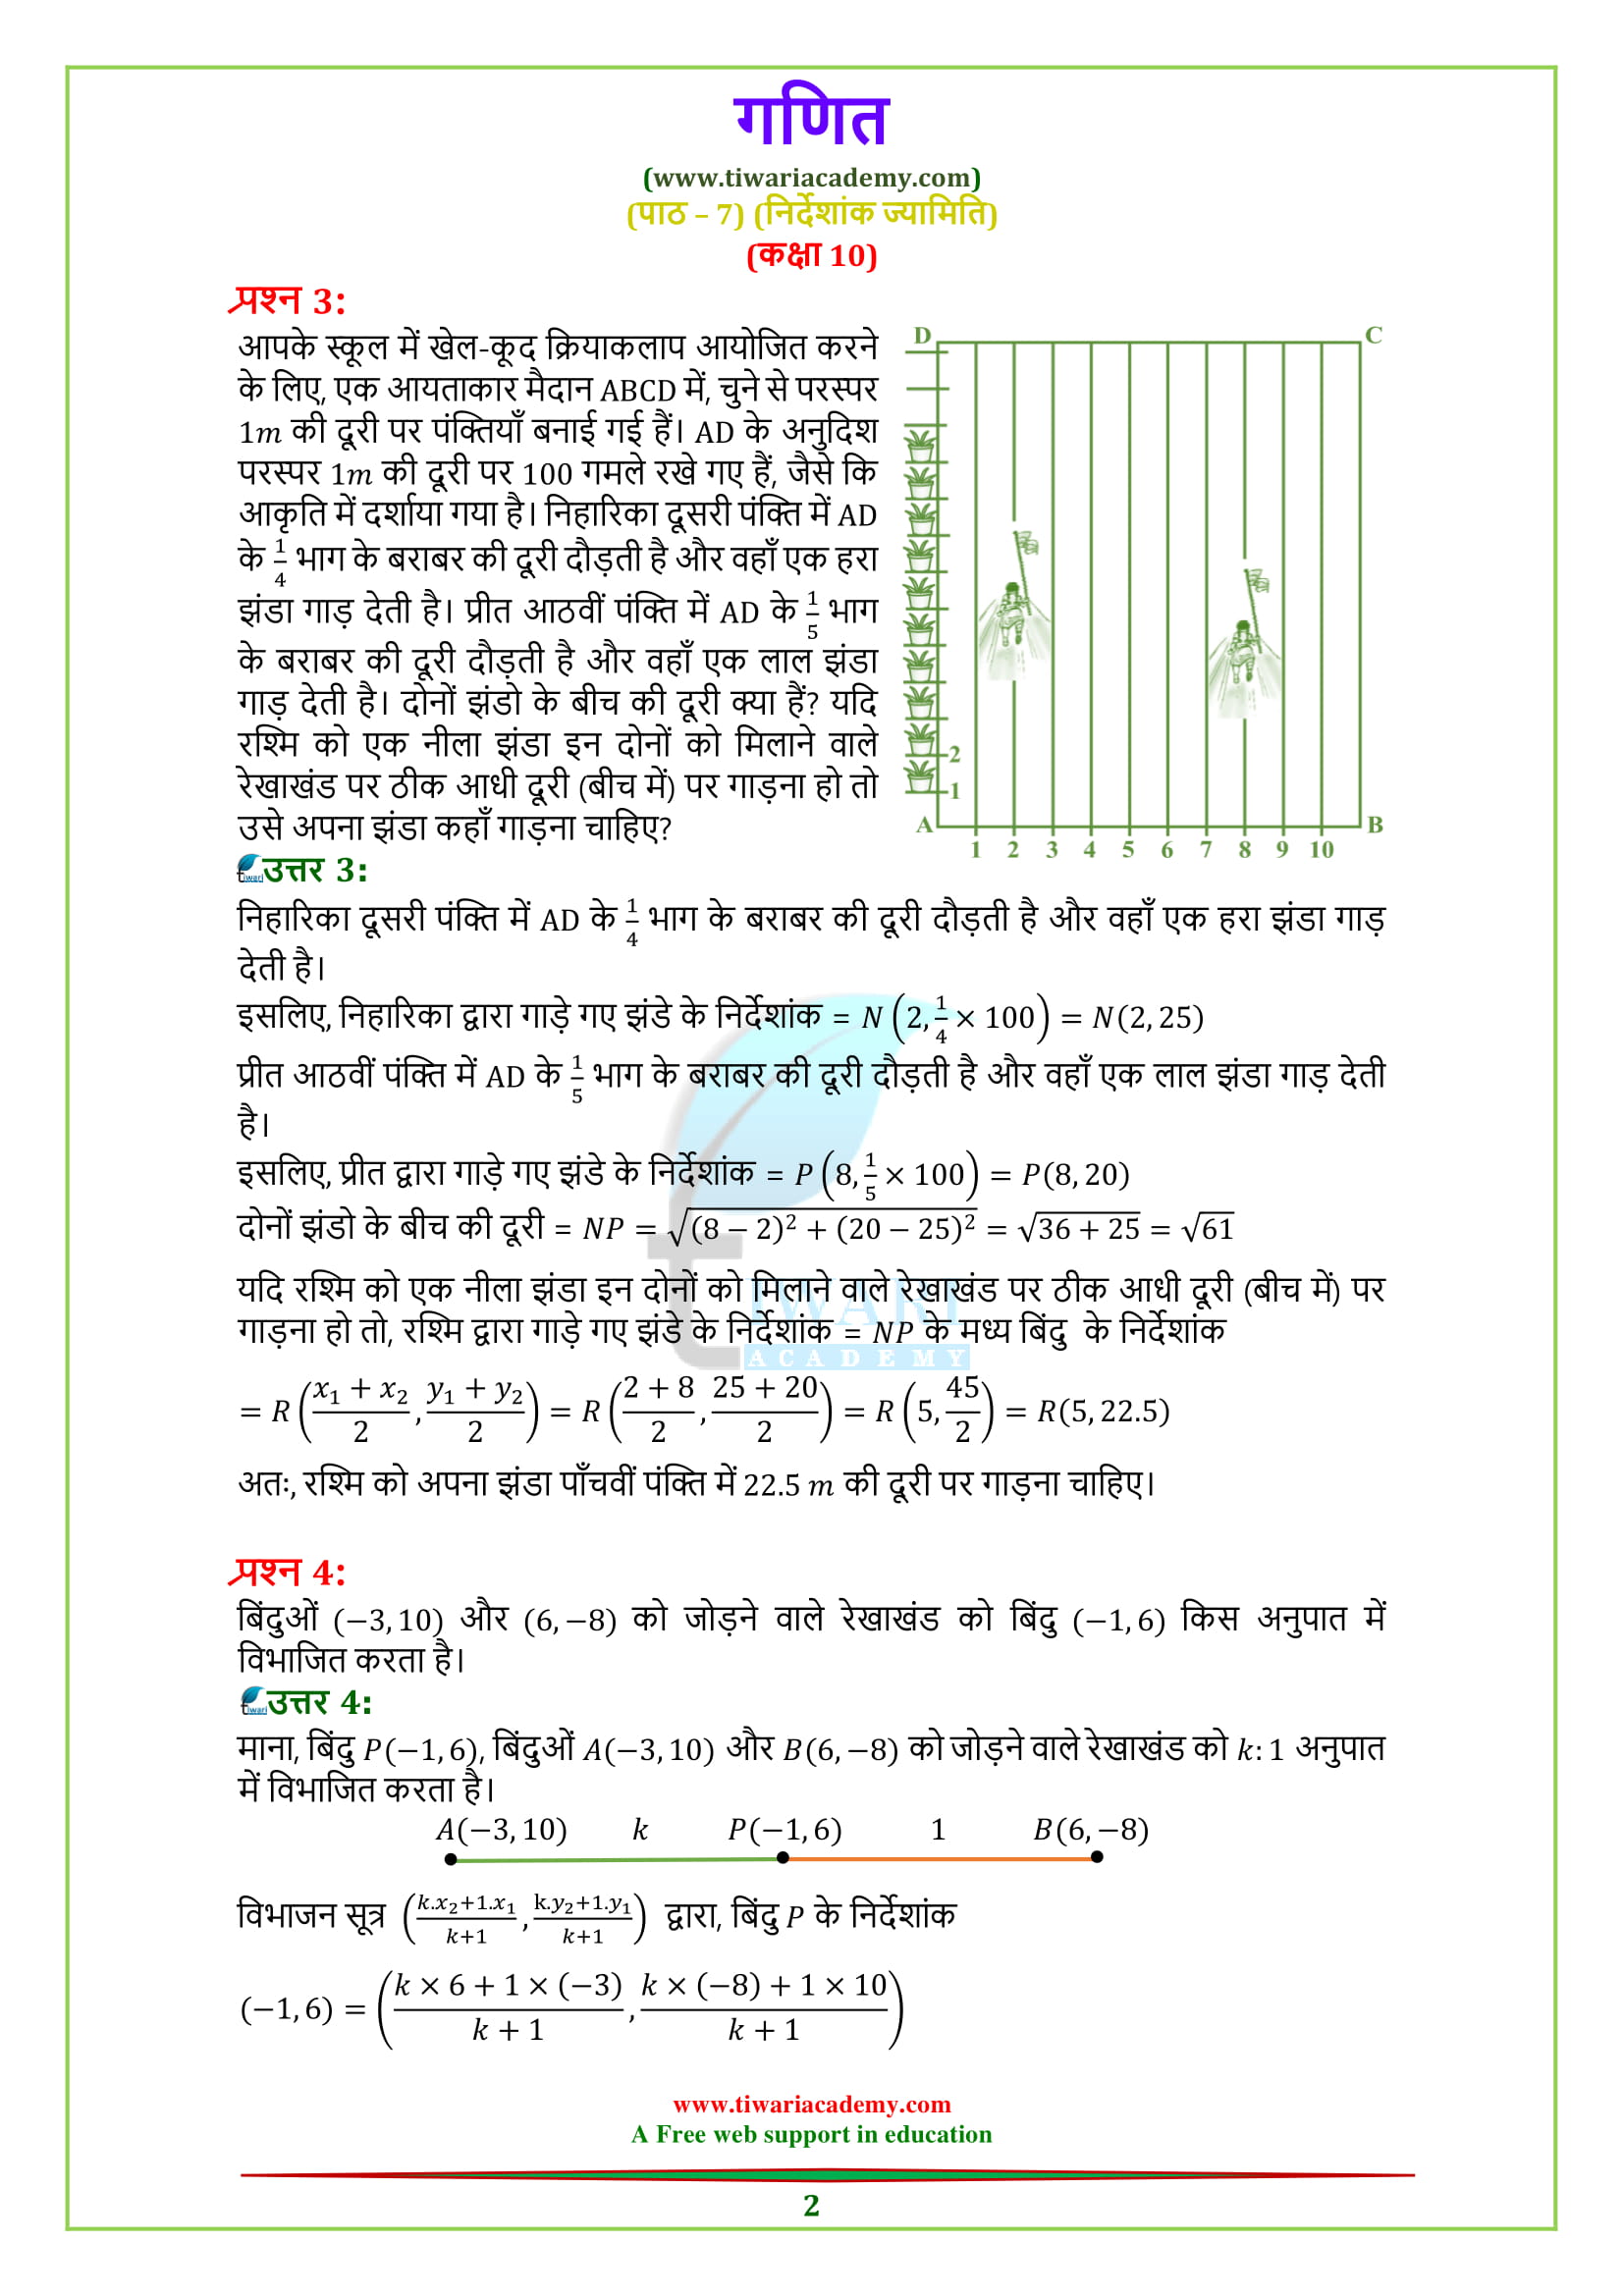 Class 10 Maths Chapter 7 Exercise 7.2 Coordinate Geometry sols for CBSE, Gujrat, UP Board, Bihar & Uttarakhand